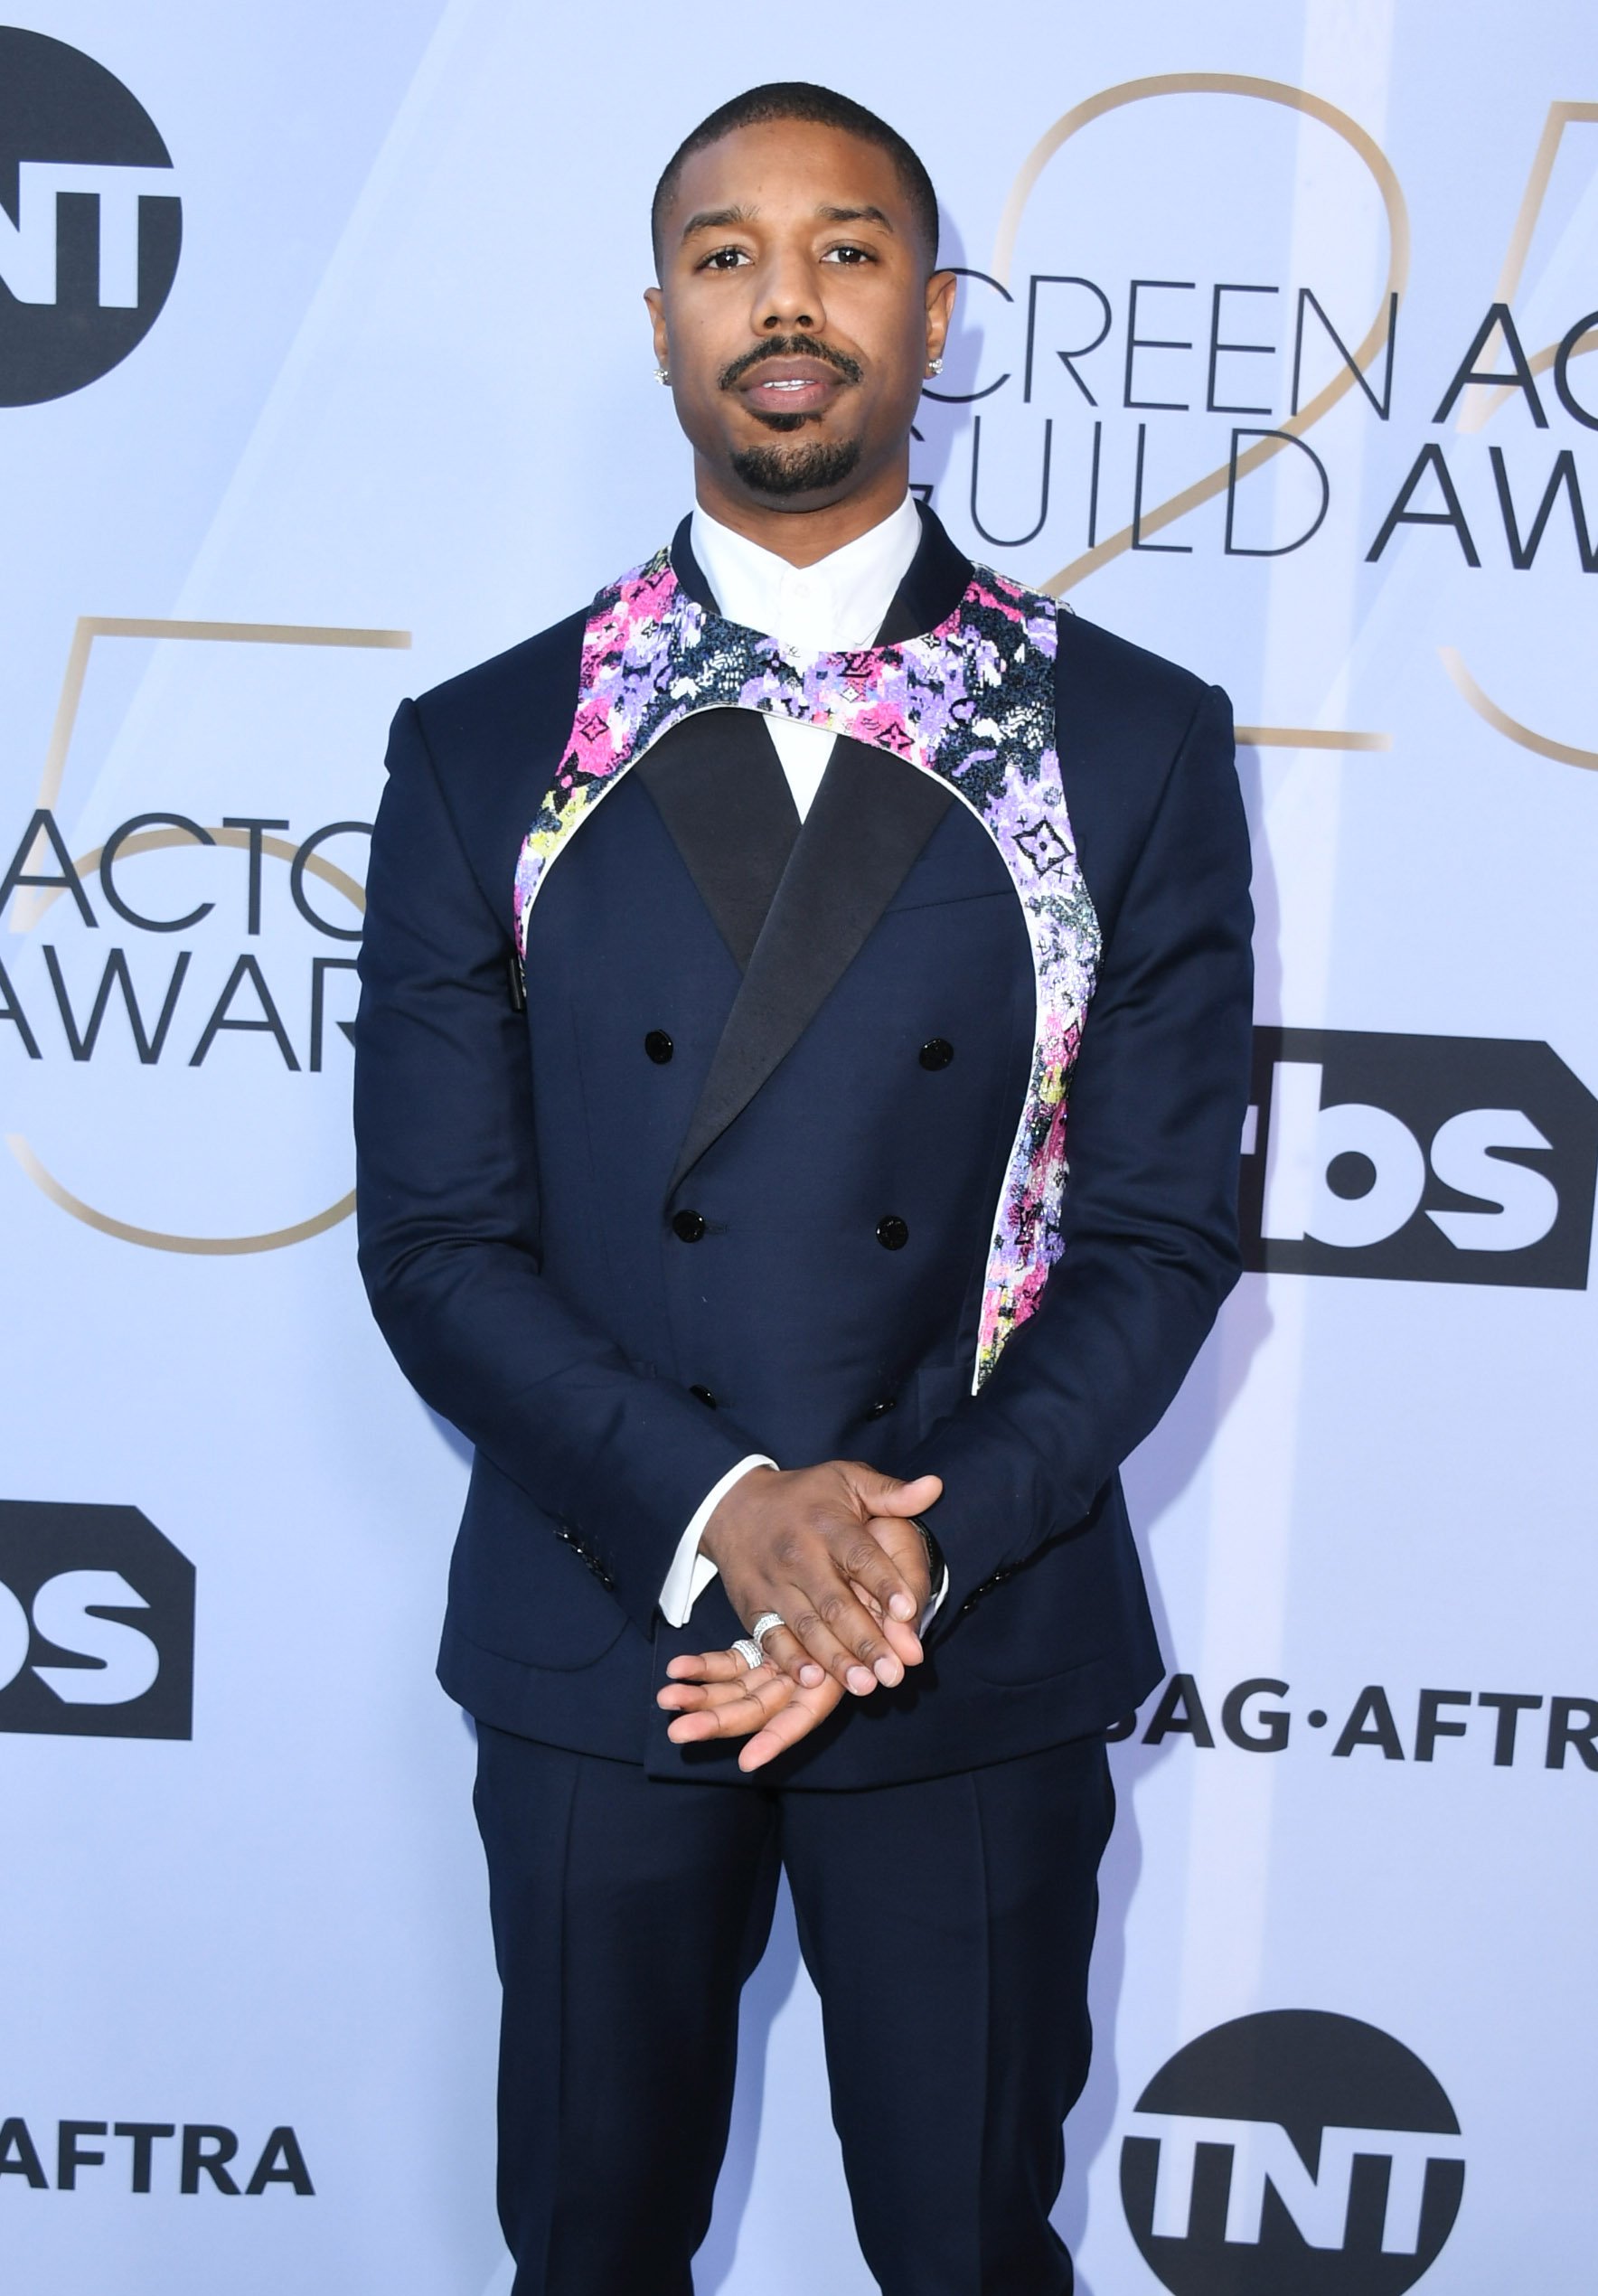 Michael B. Jordan at the 25th Annual Screen Actors Guild Awards in California on Jan. 27, 2019 | Photo: Getty Images